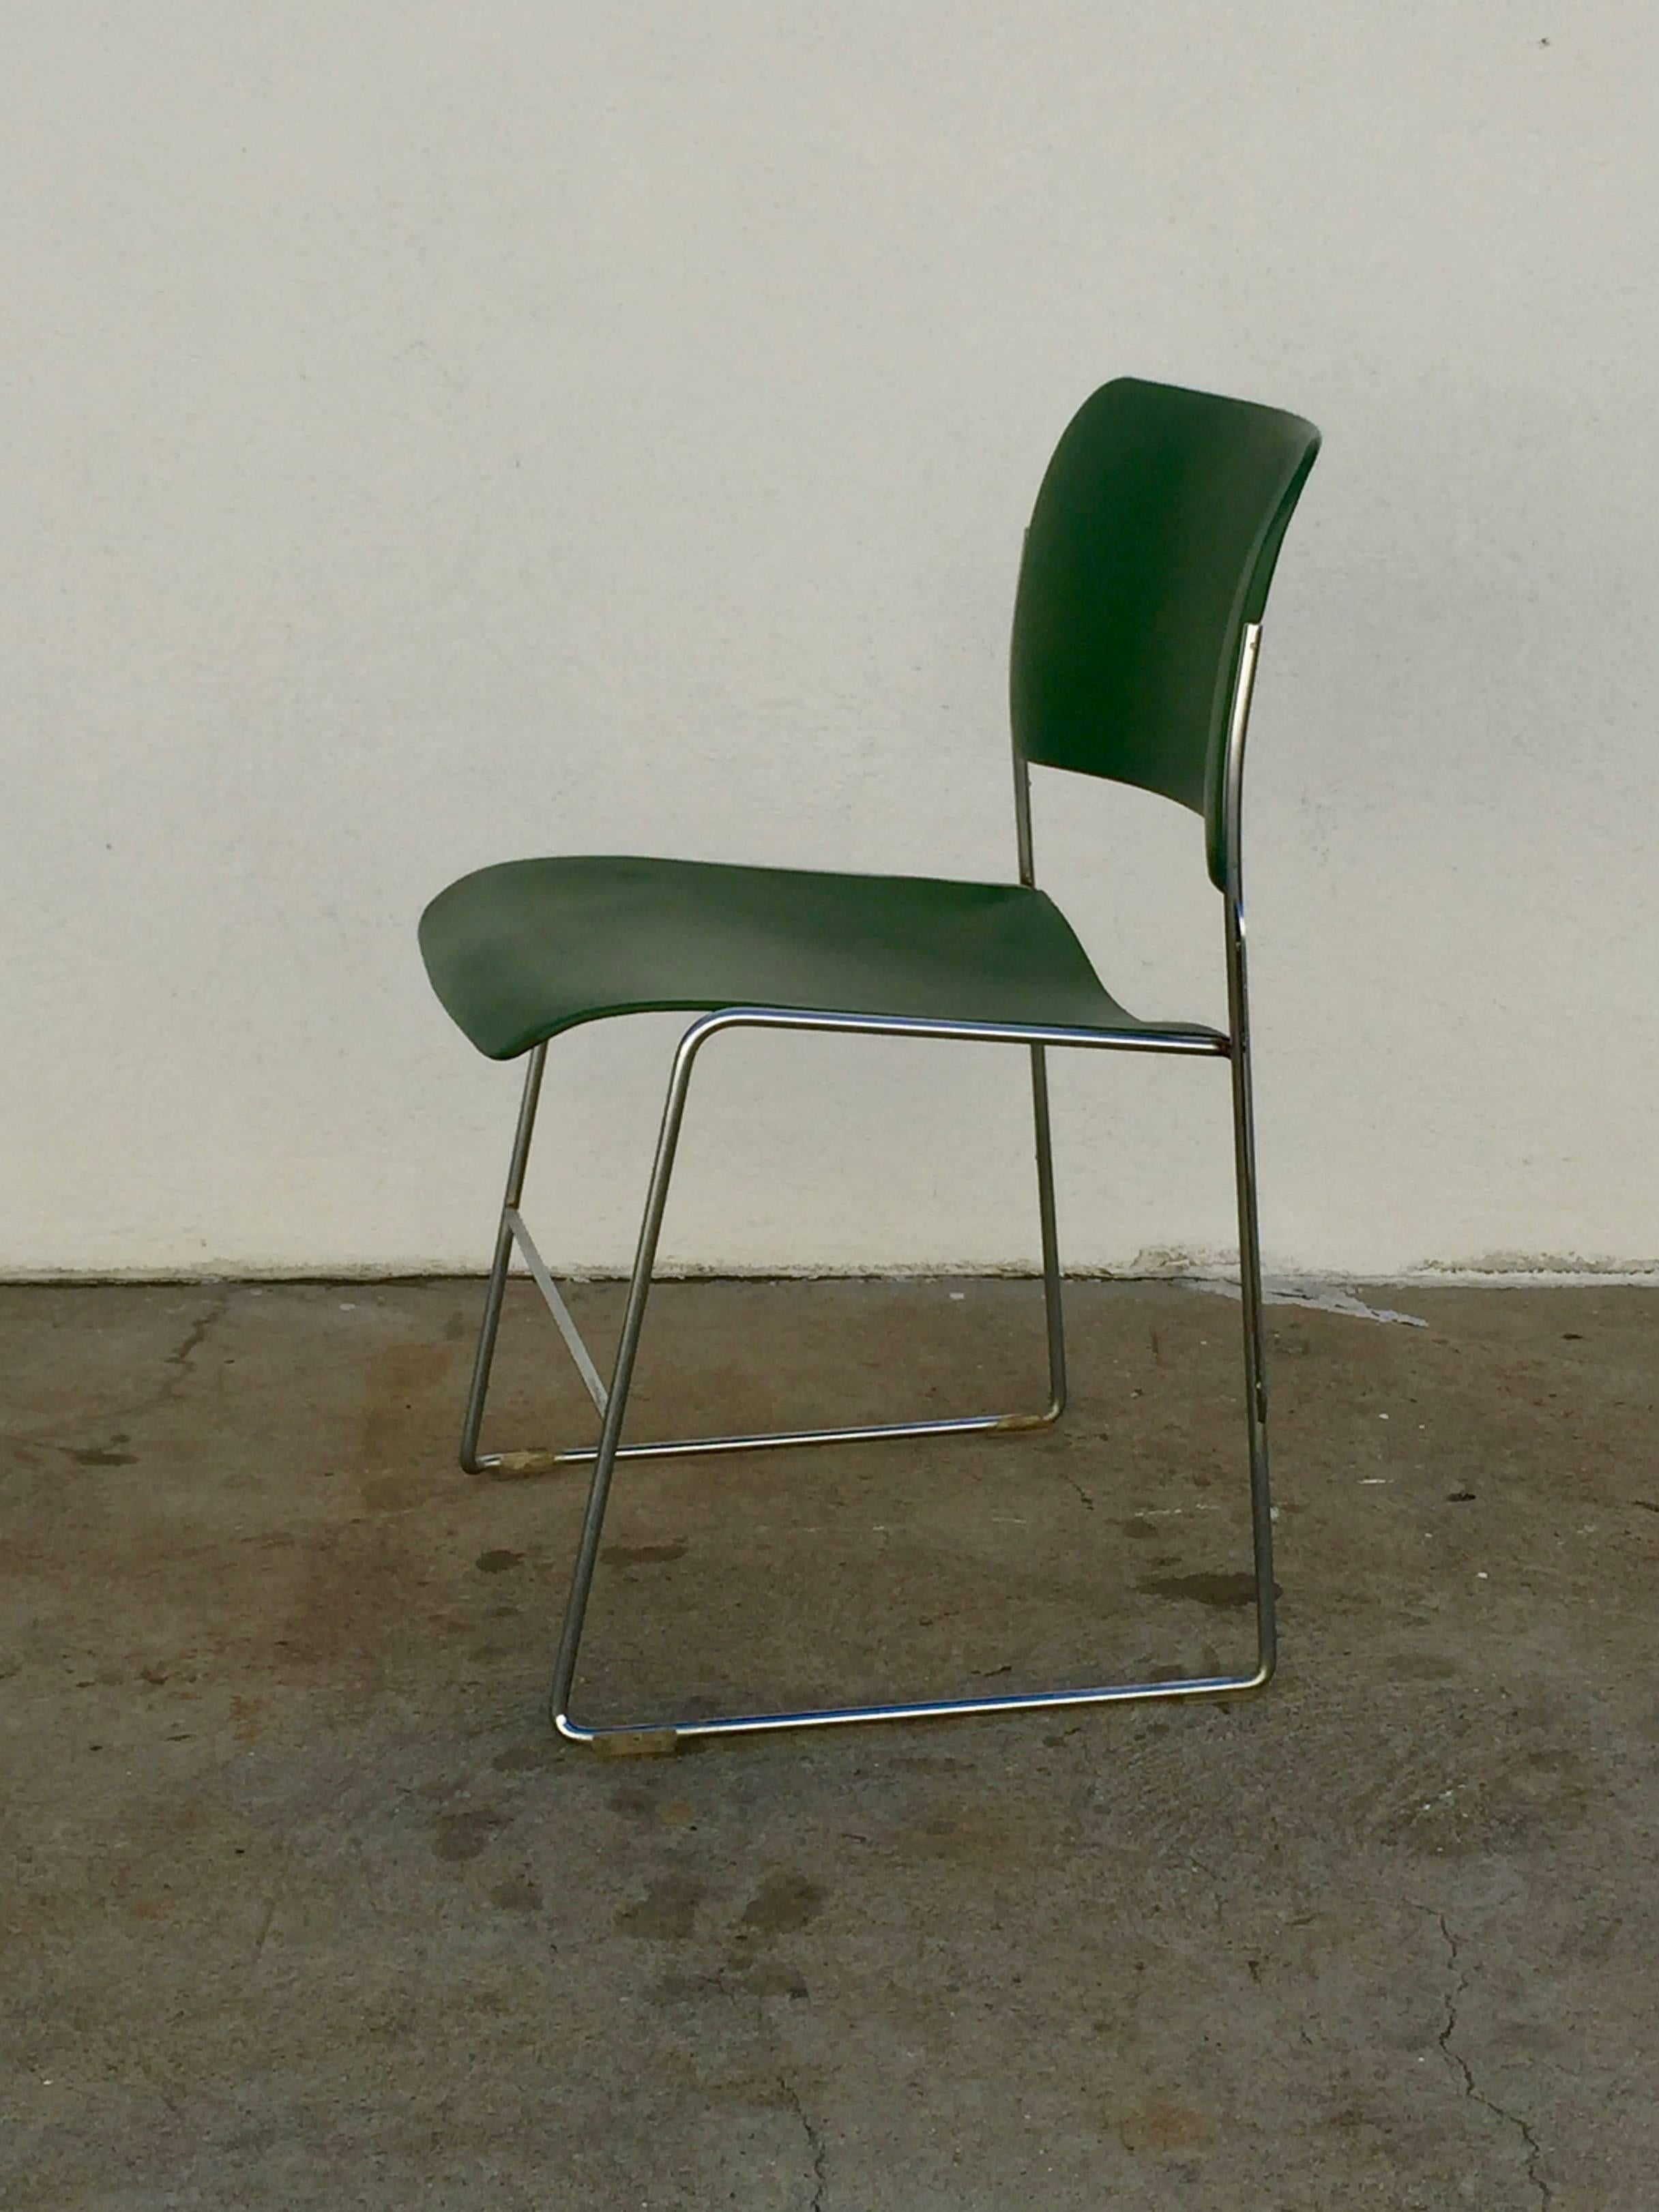 American Set of 40/4 Green Chairs by David Rowland